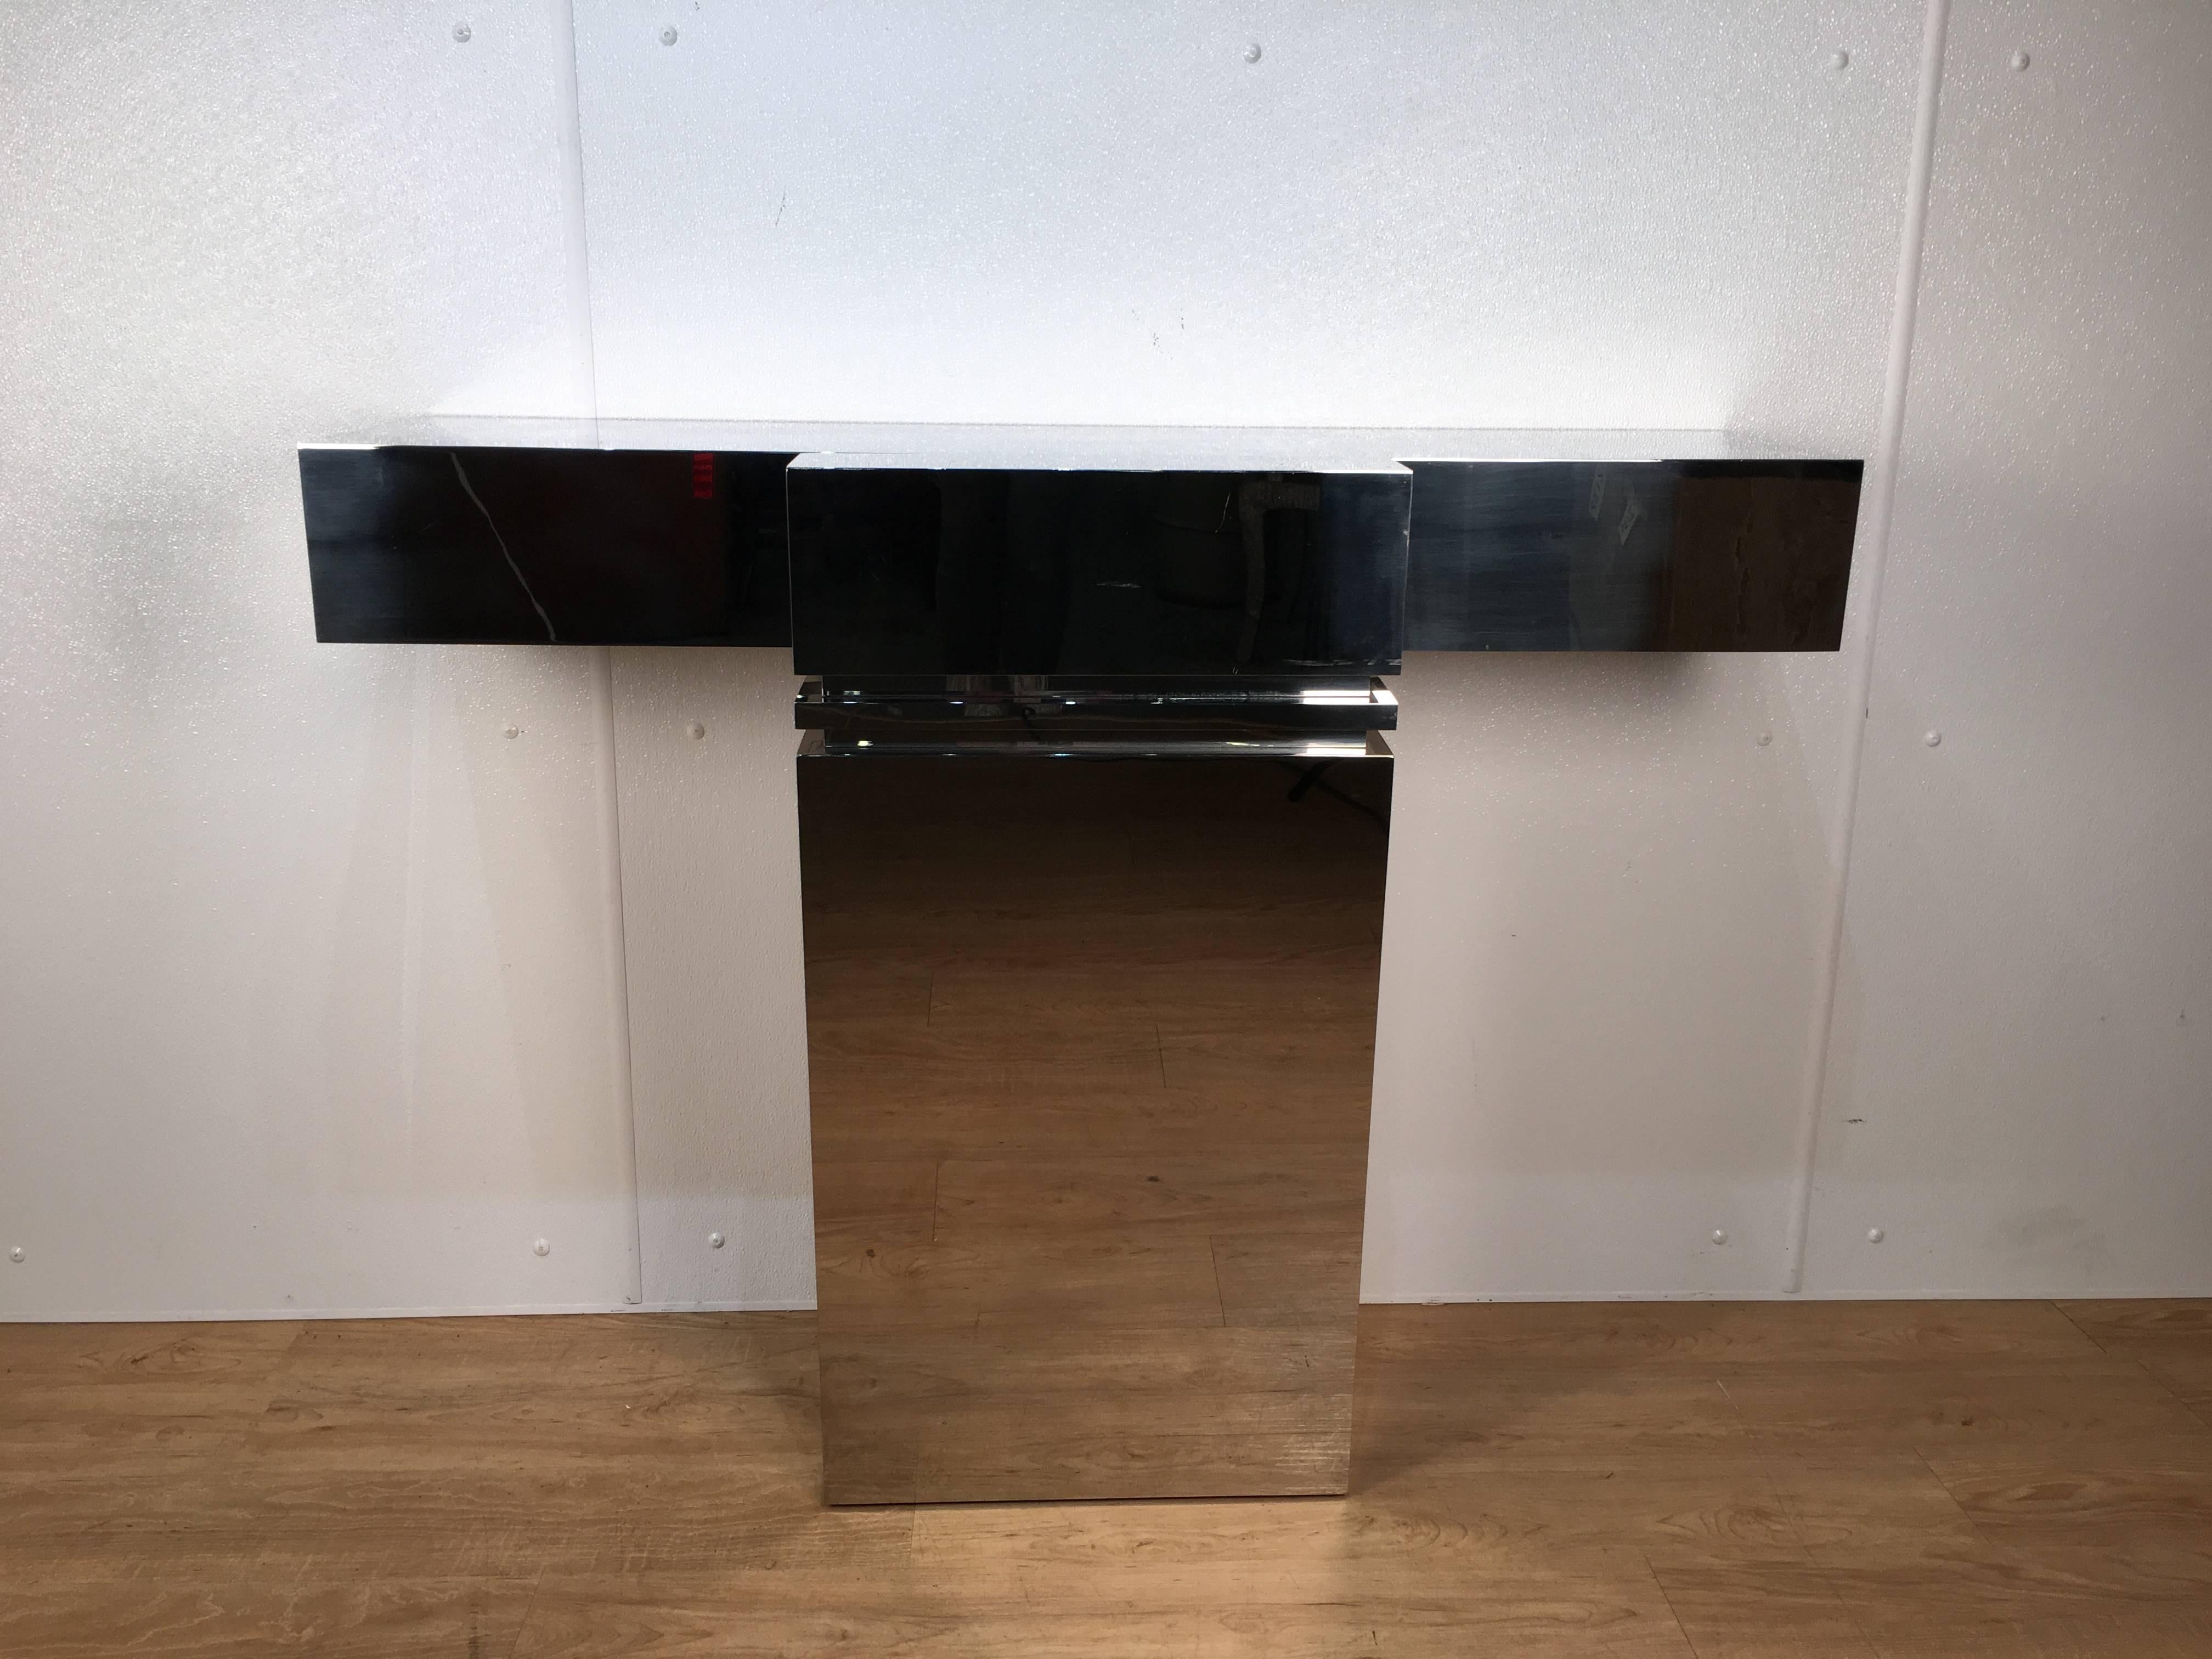 Breuton style chrome console raised on a monolith pedestal with recessed top. Option for illumination from underneath console top. Chrome shows normal wear consistent with age and use and presents very well. Console must be attached to the wall for